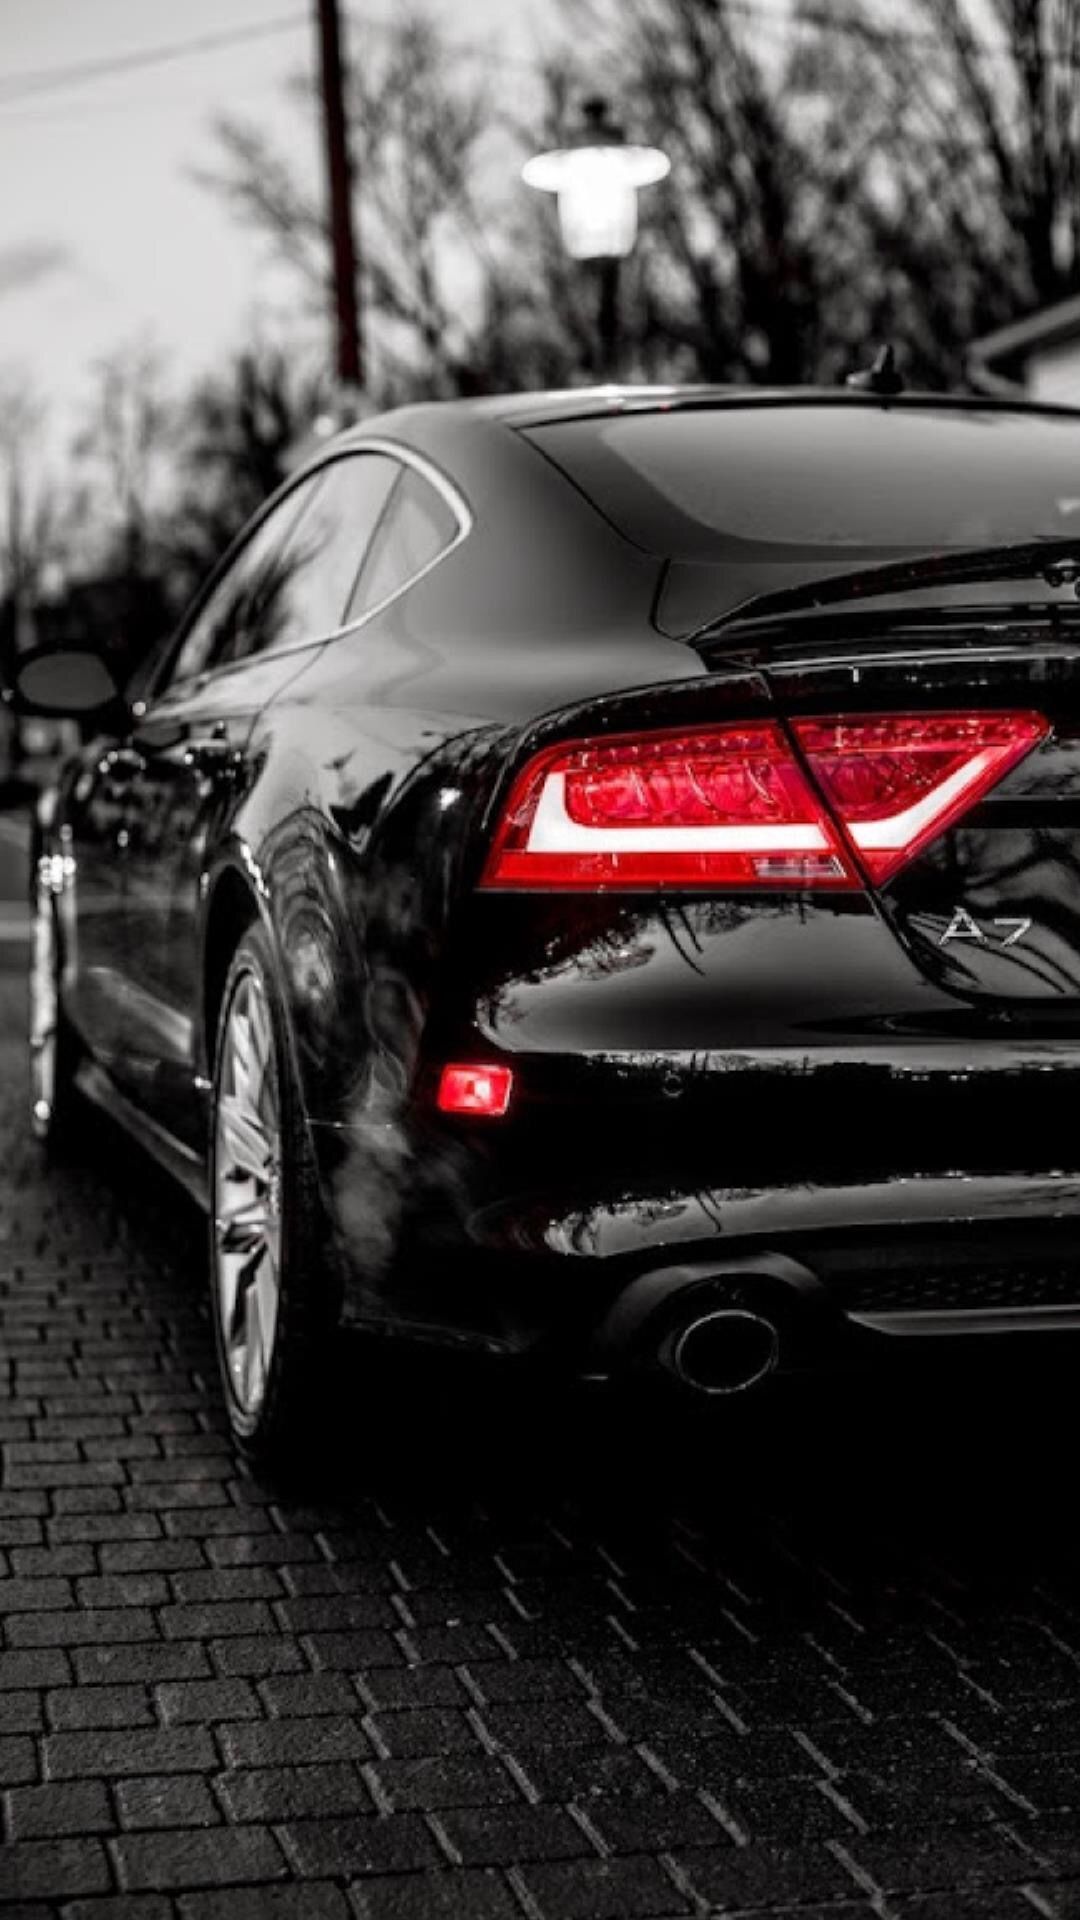 Audi A7 Classy Cars Pinterest And Rs7 Wallpaper Iphone - Audi Rs7 Wallpaper Iphone , HD Wallpaper & Backgrounds